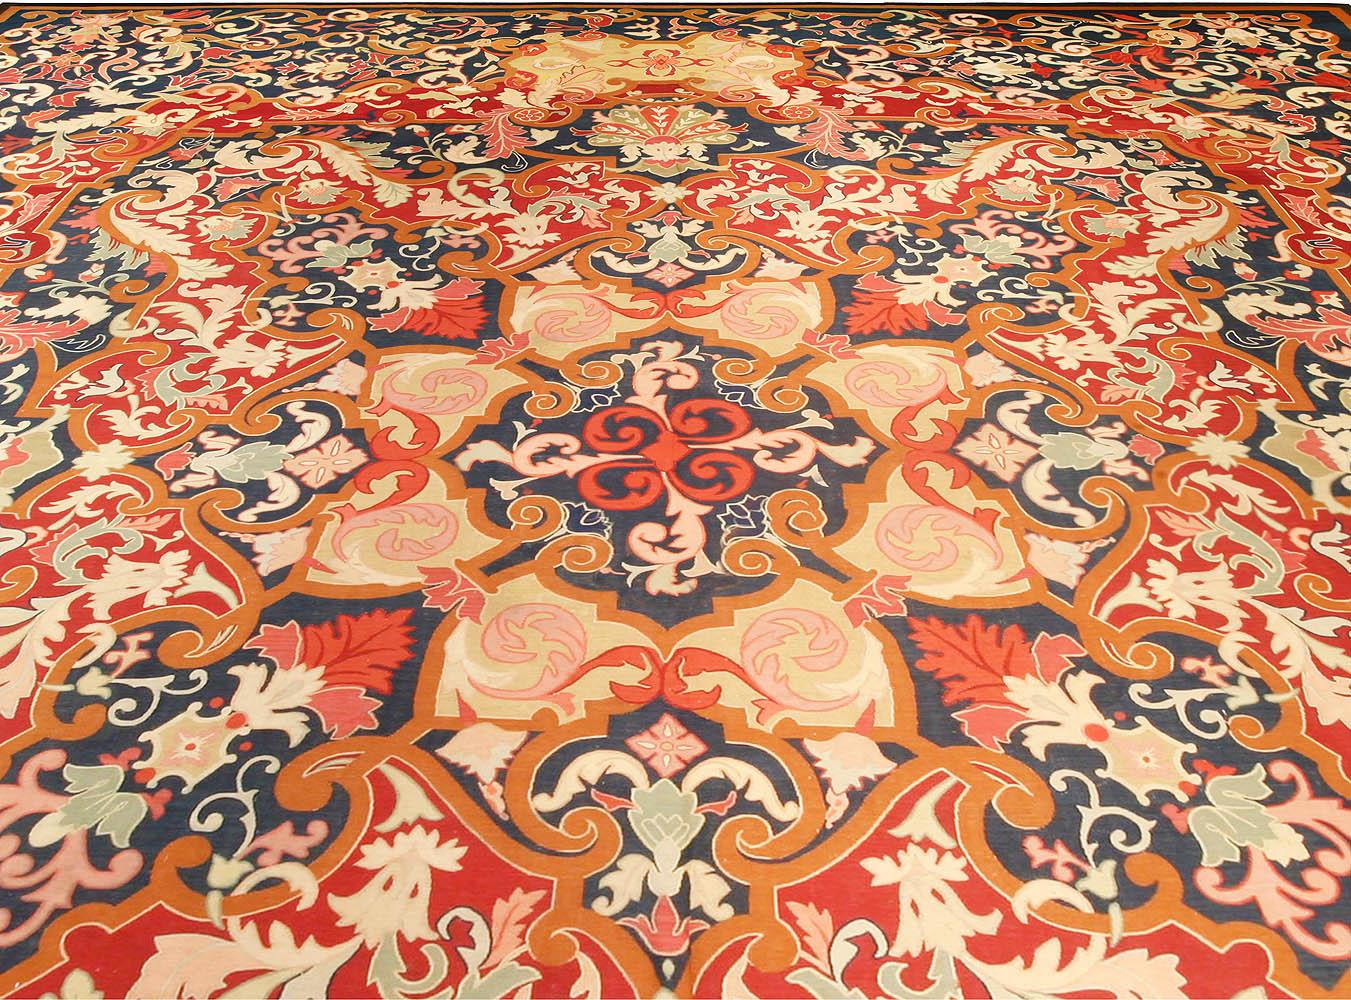 Authentic 19th Century French Aubusson Red Handmade Wool Rug
Size: 18'0